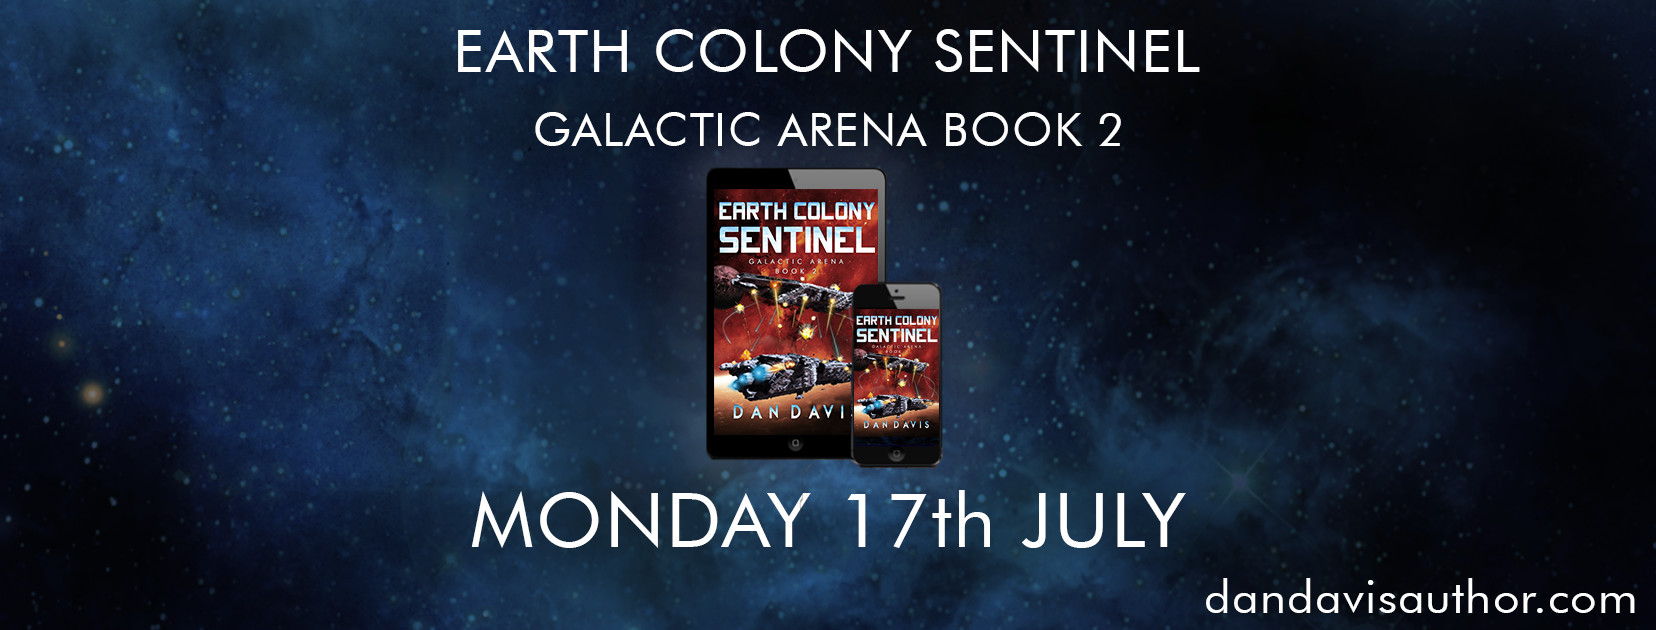 Earth Colony Sentinel: Galactic Arena Book 2 release day 17th July 2017 #scifi